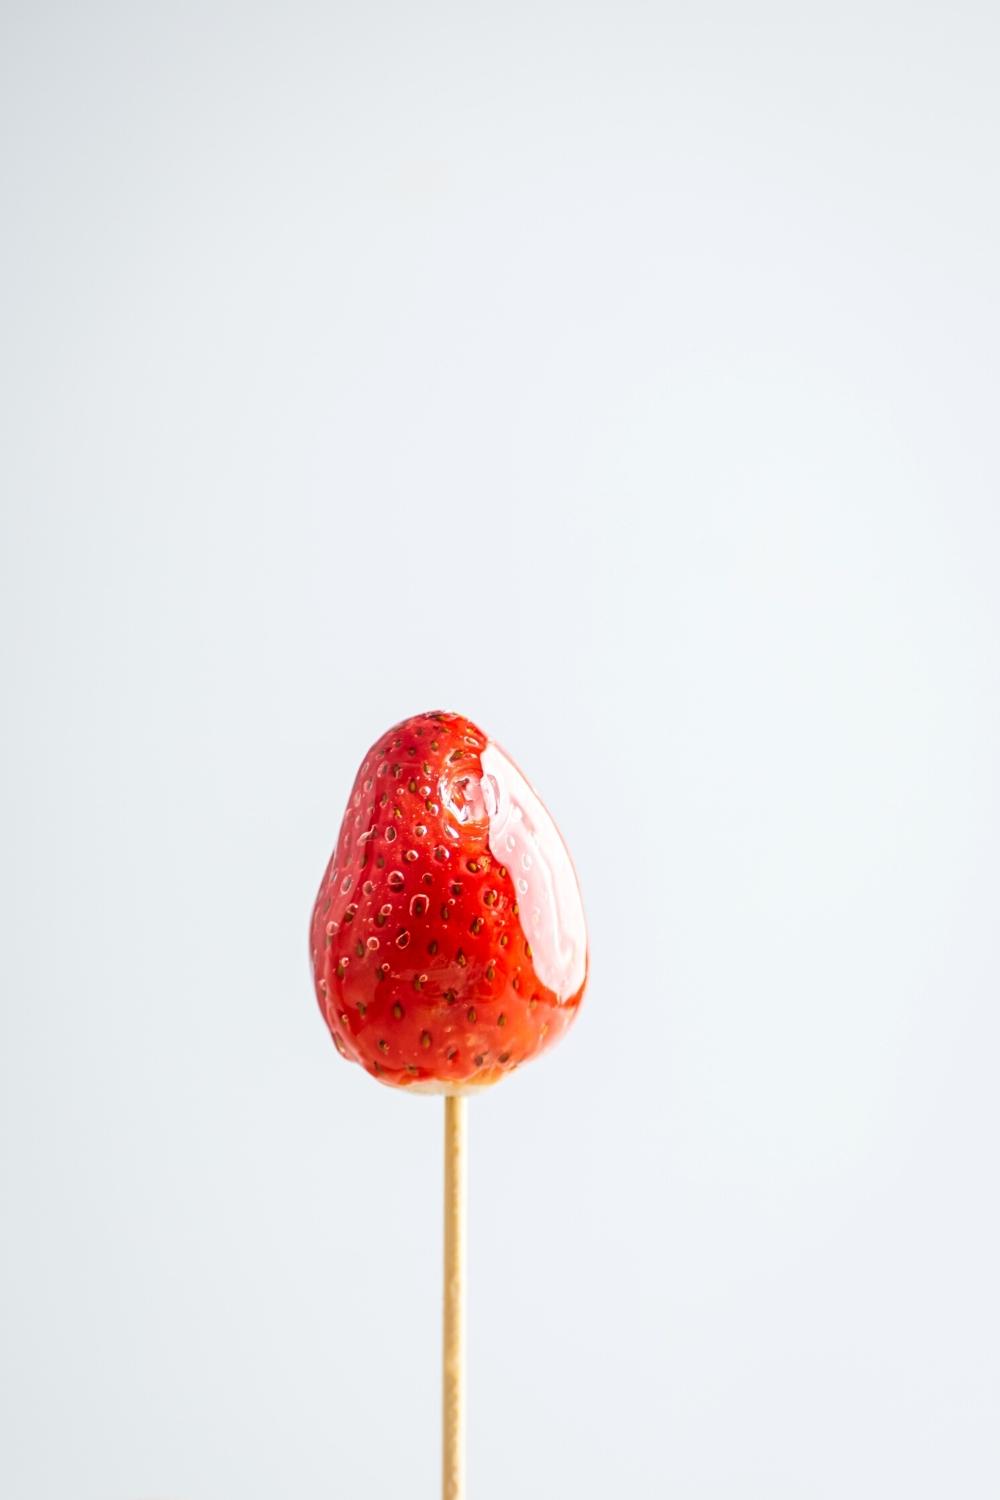 A wooden stick with a strawberry on it.